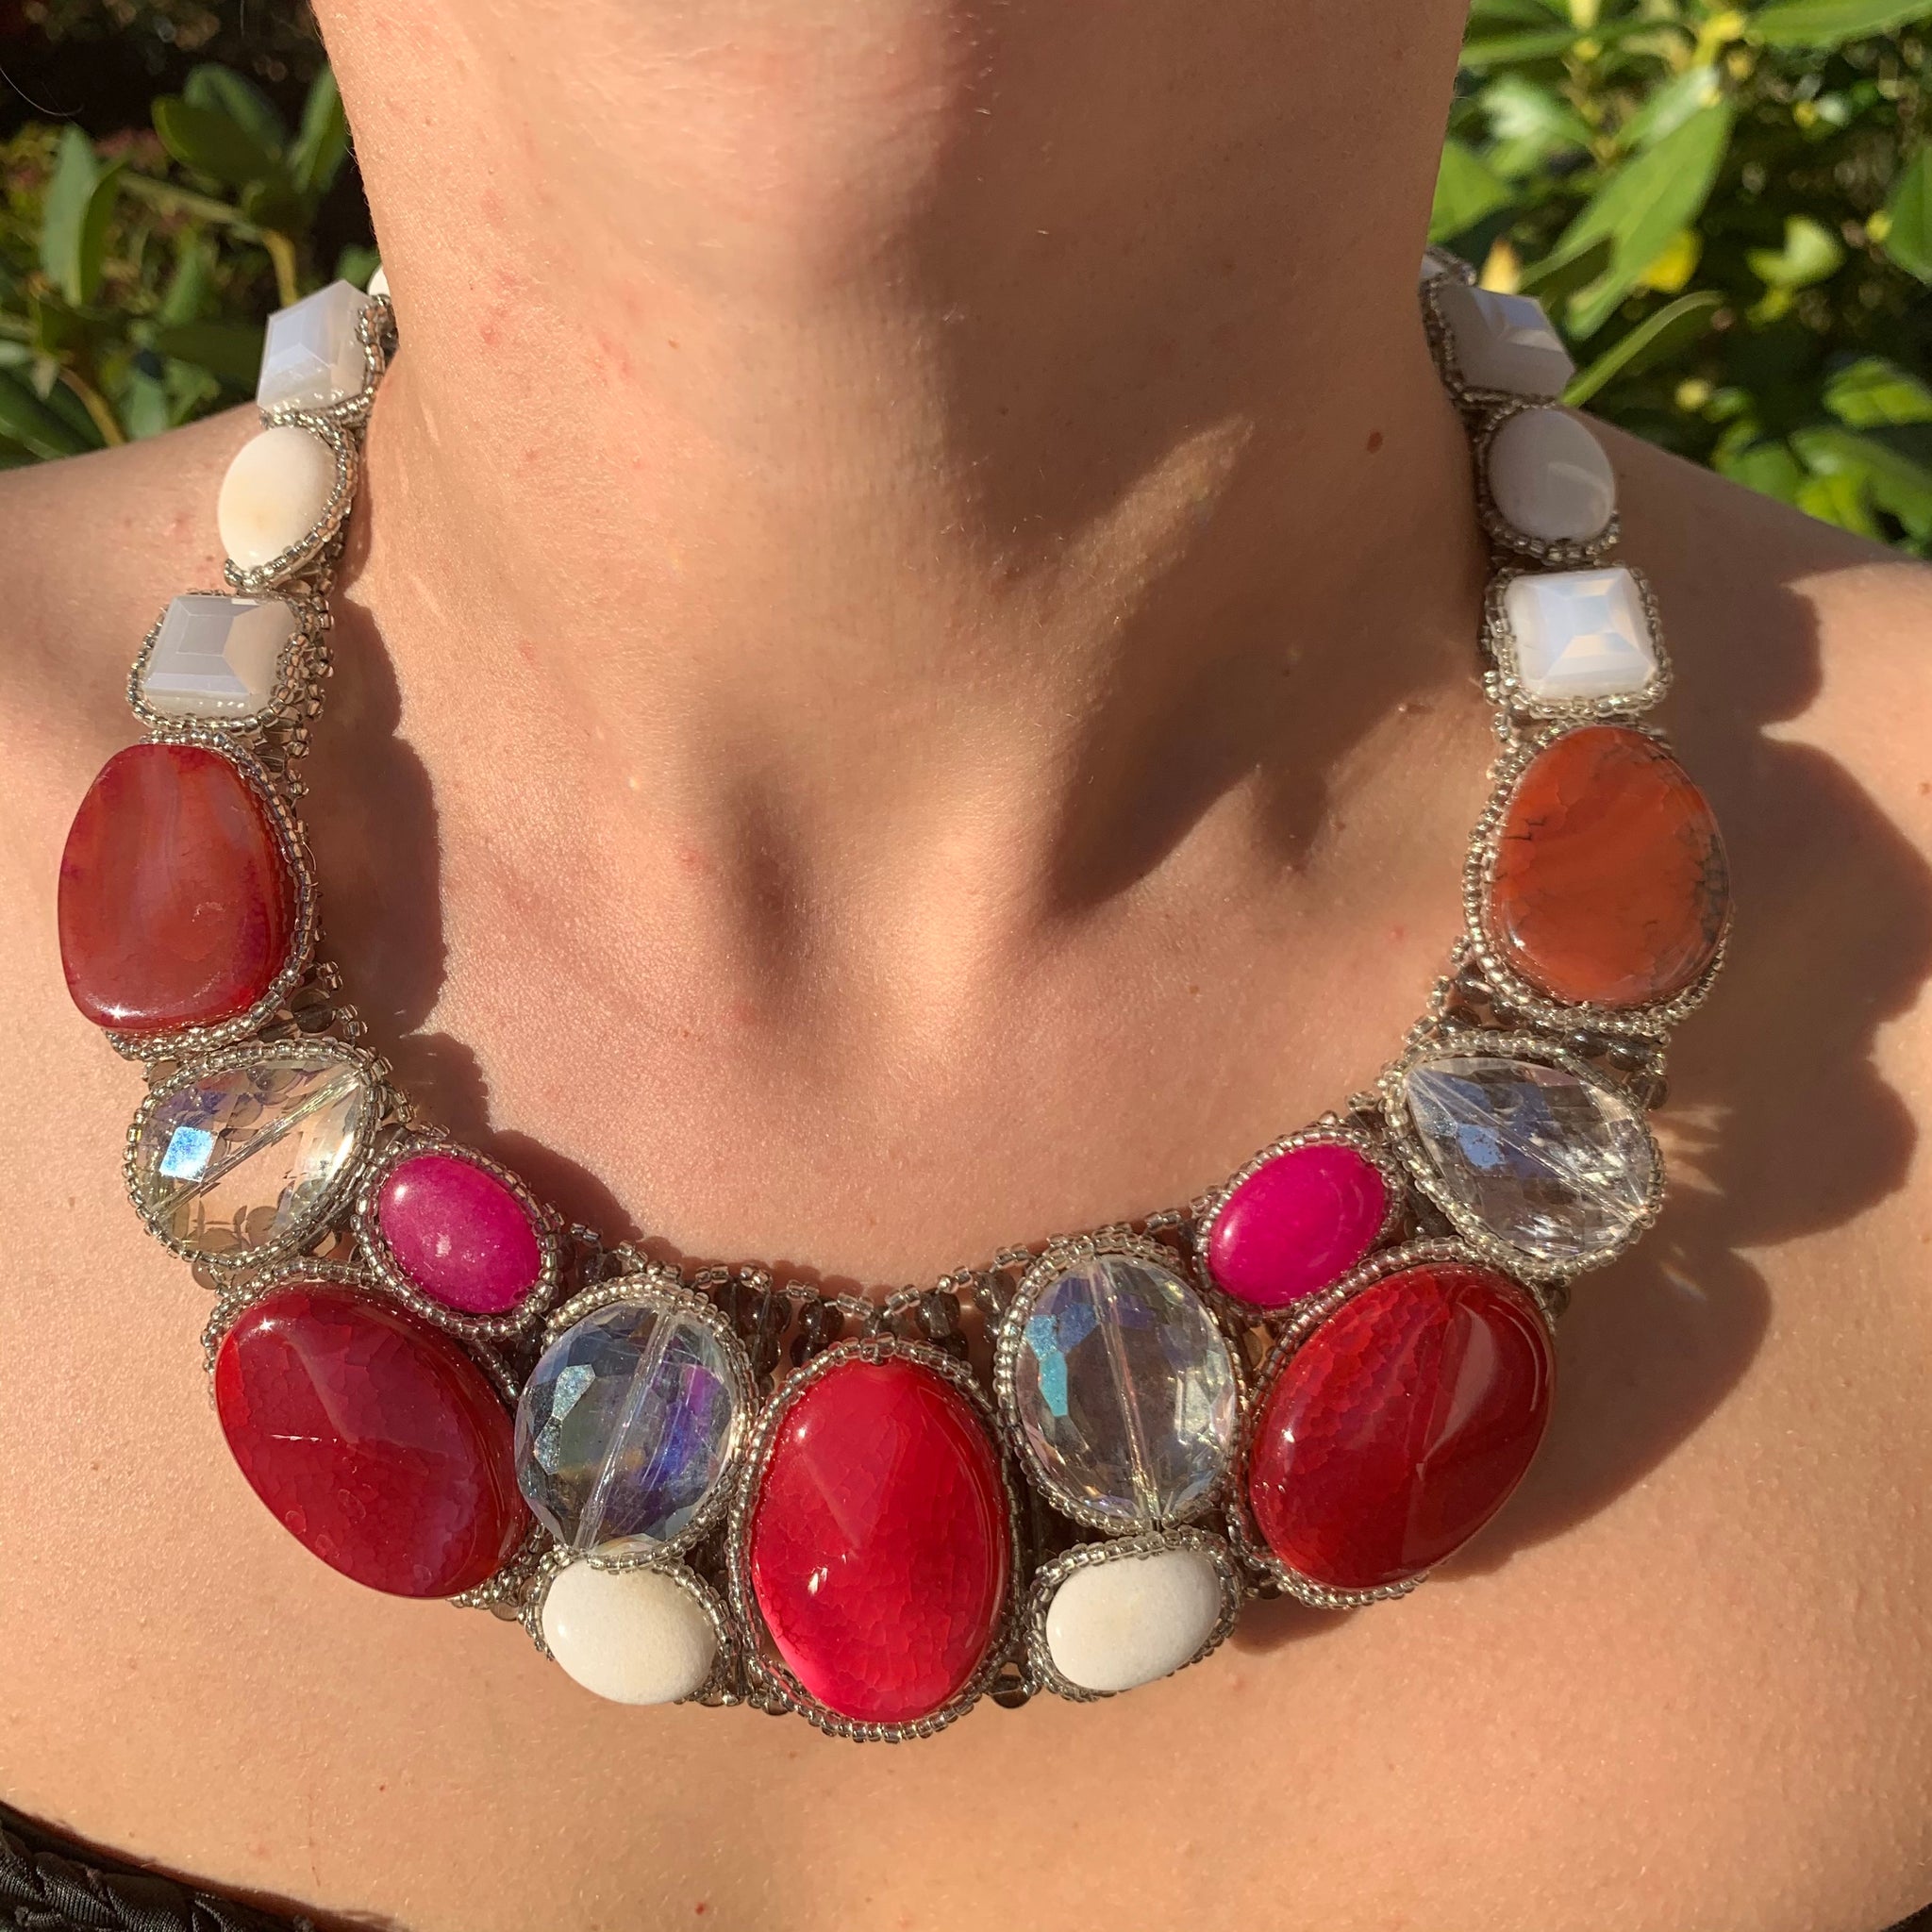 Handmade Choker 20" Inlay Cabochon Red and Clear Agate Beads Necklace Jewelry